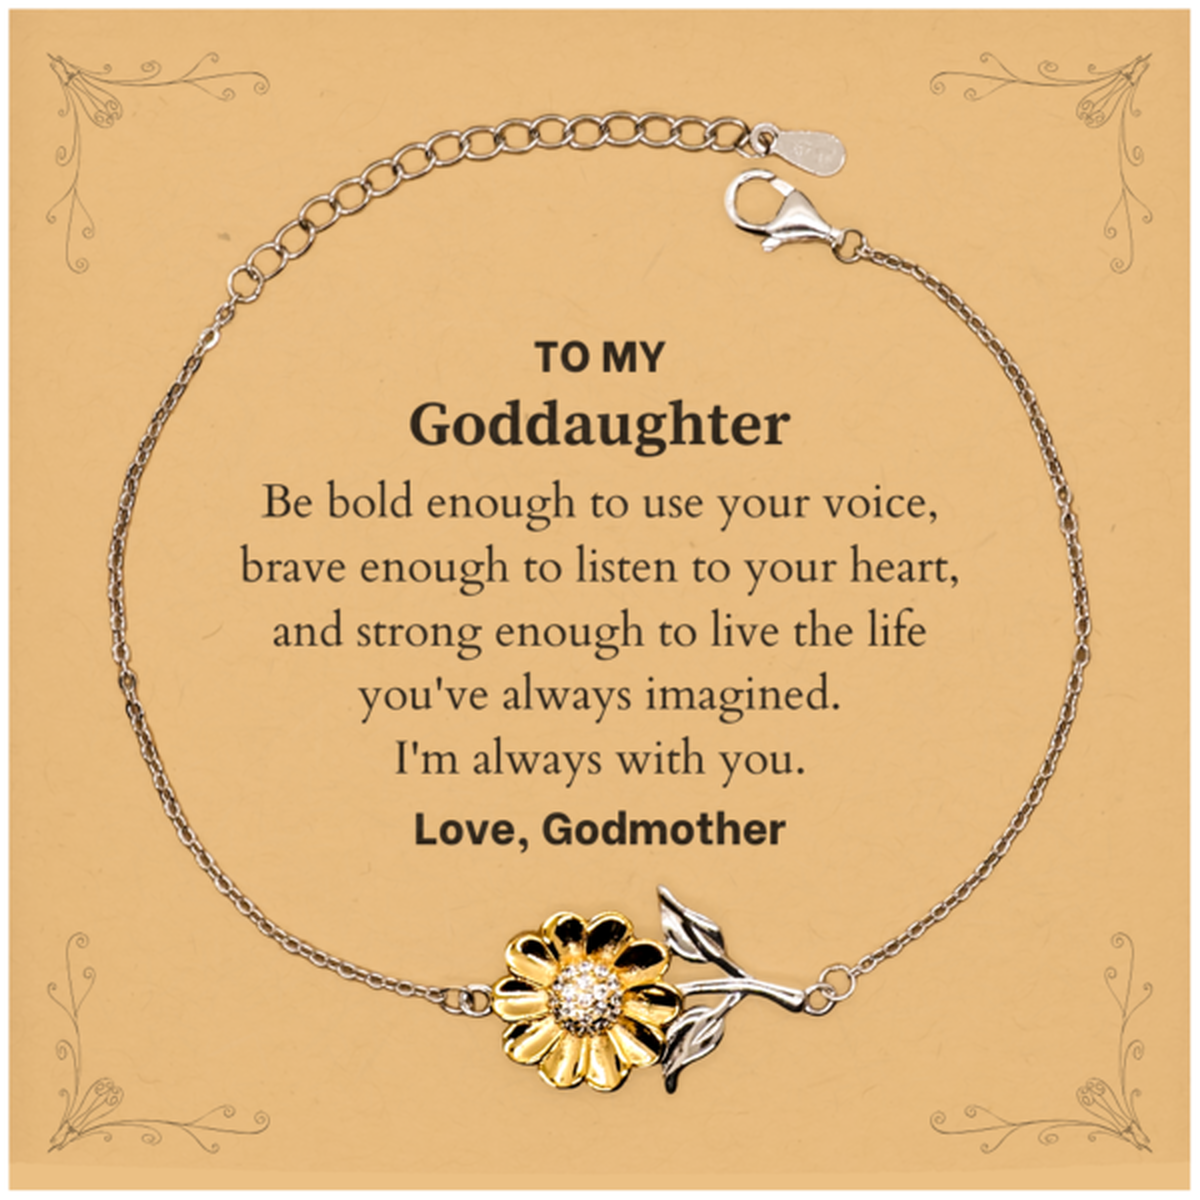 Keepsake Goddaughter Sunflower Bracelet Gift Idea Graduation Christmas Birthday Goddaughter from Godmother, Goddaughter Be bold enough to use your voice, brave enough to listen to your heart. Love, Godmother